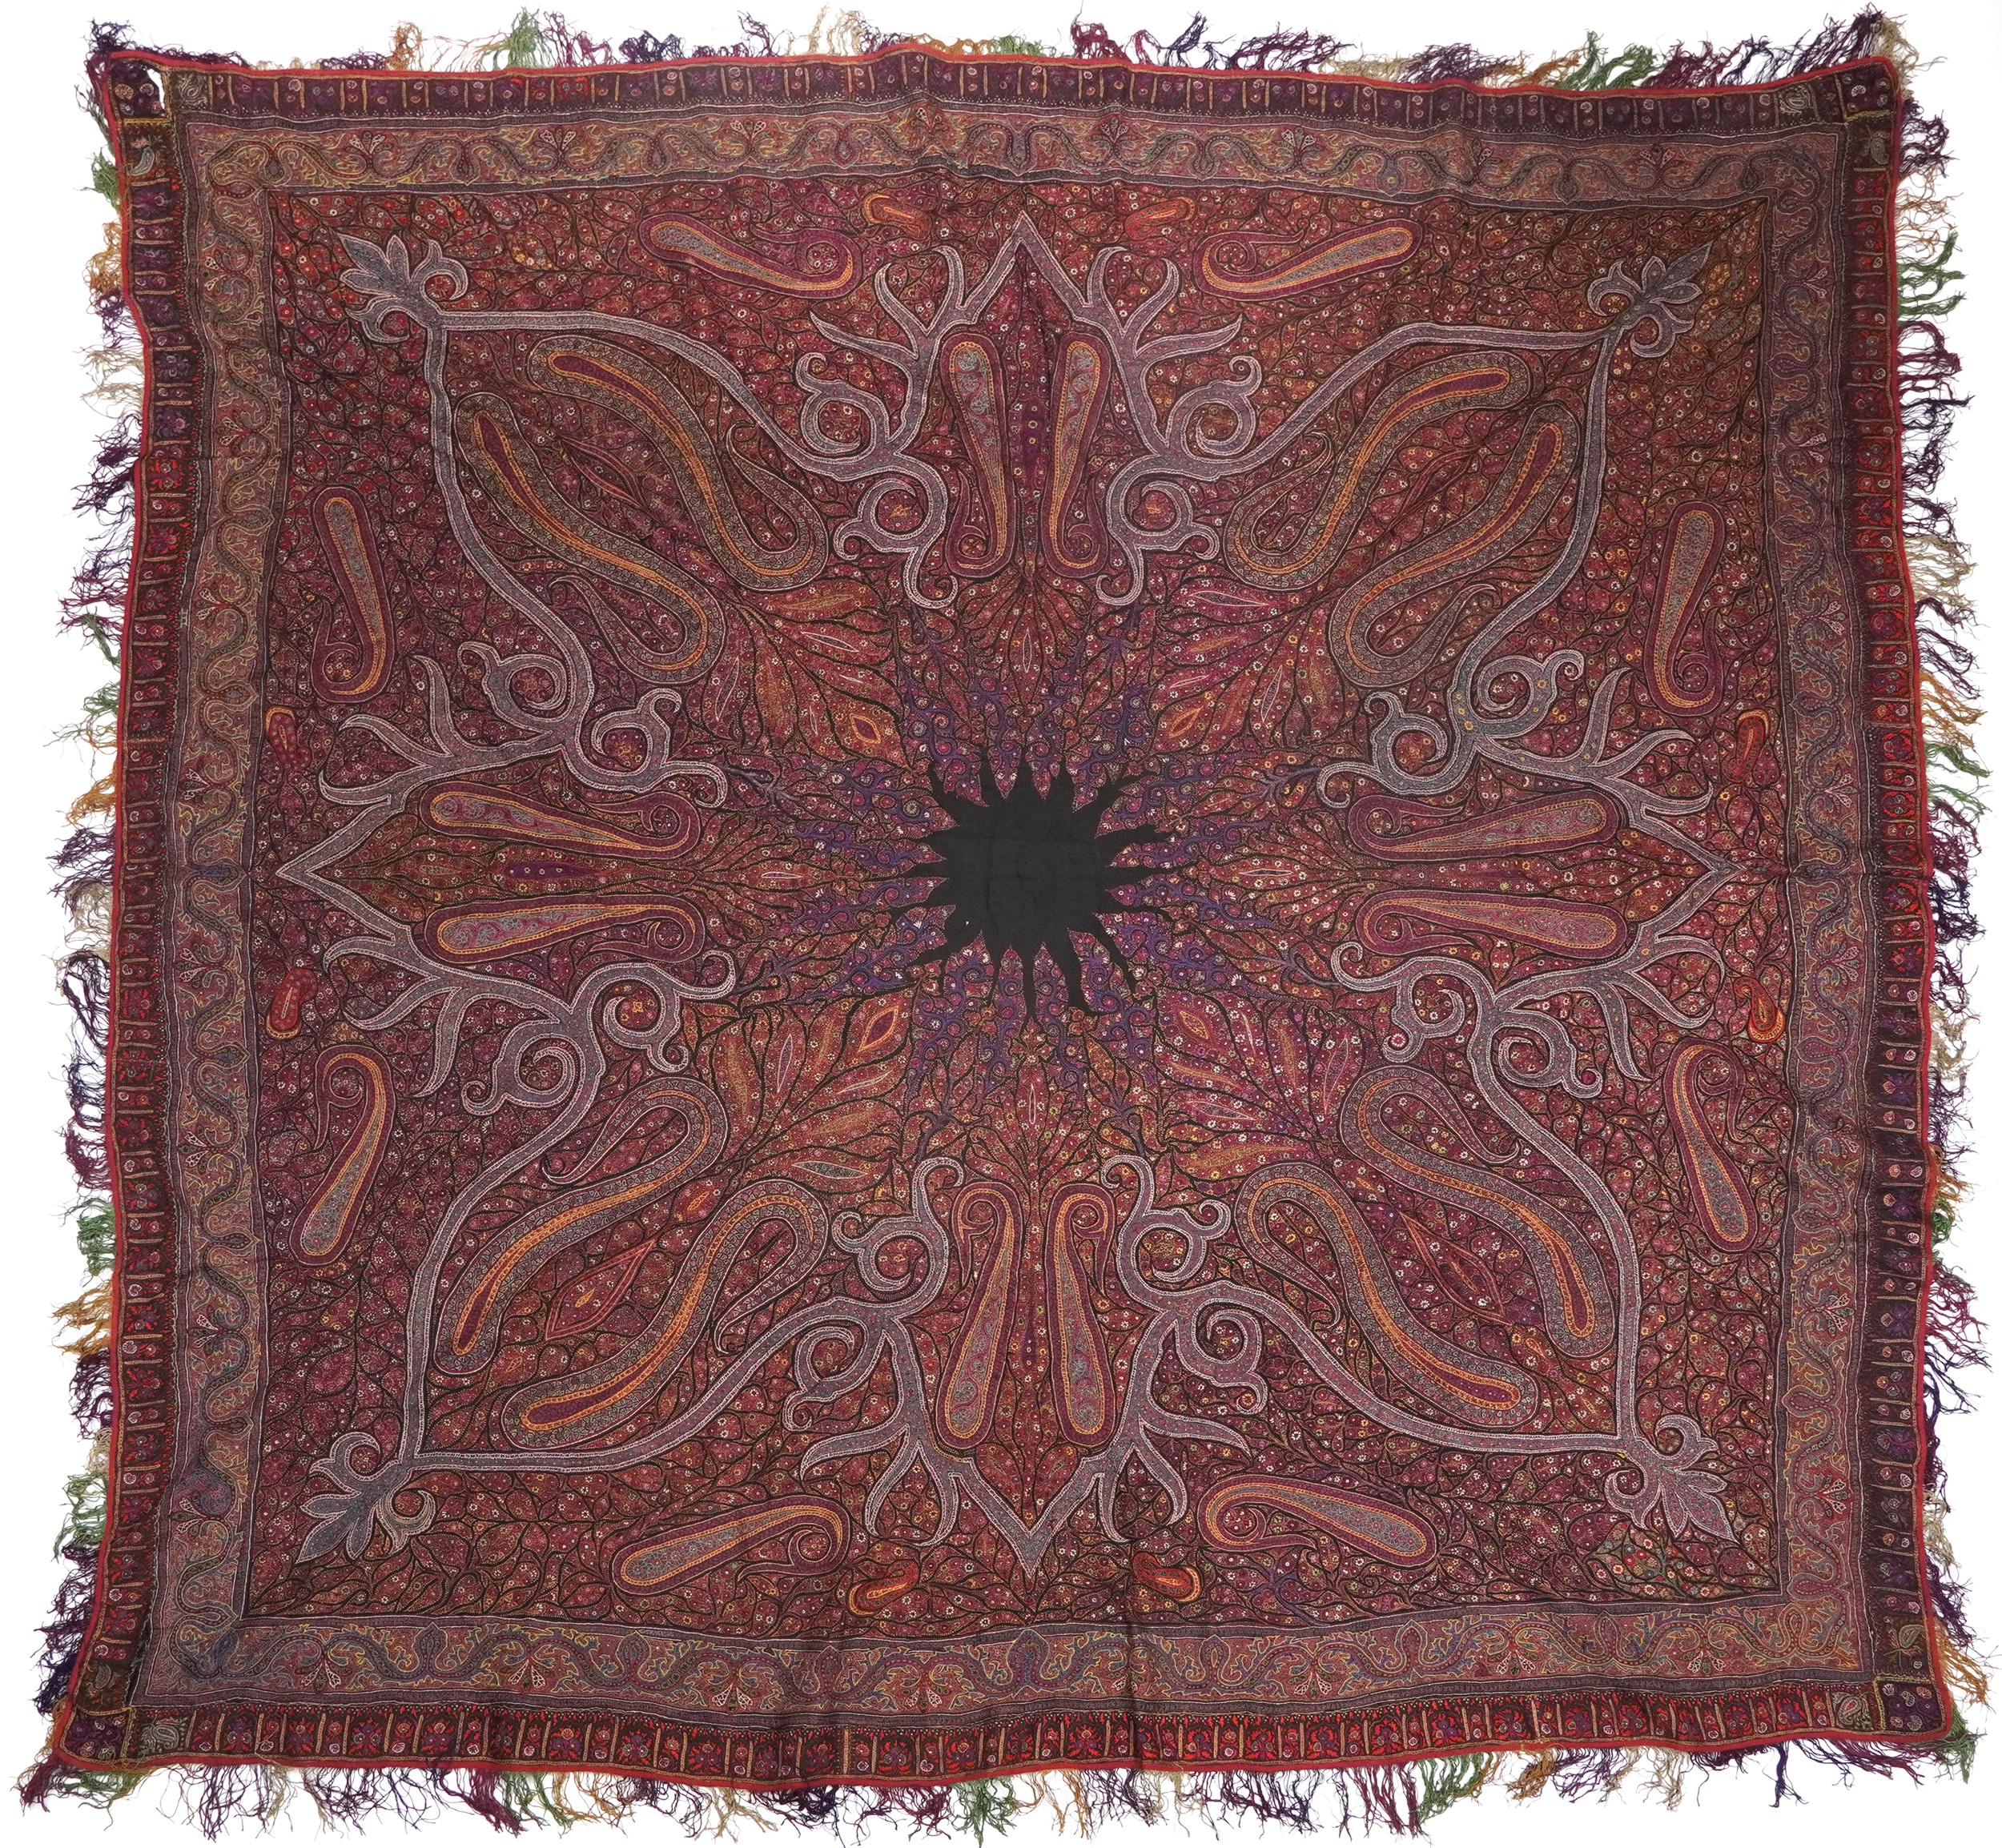 19th century Indian Kashmir/cashmere textile or shawl, 170cm x 170cm : For further information on